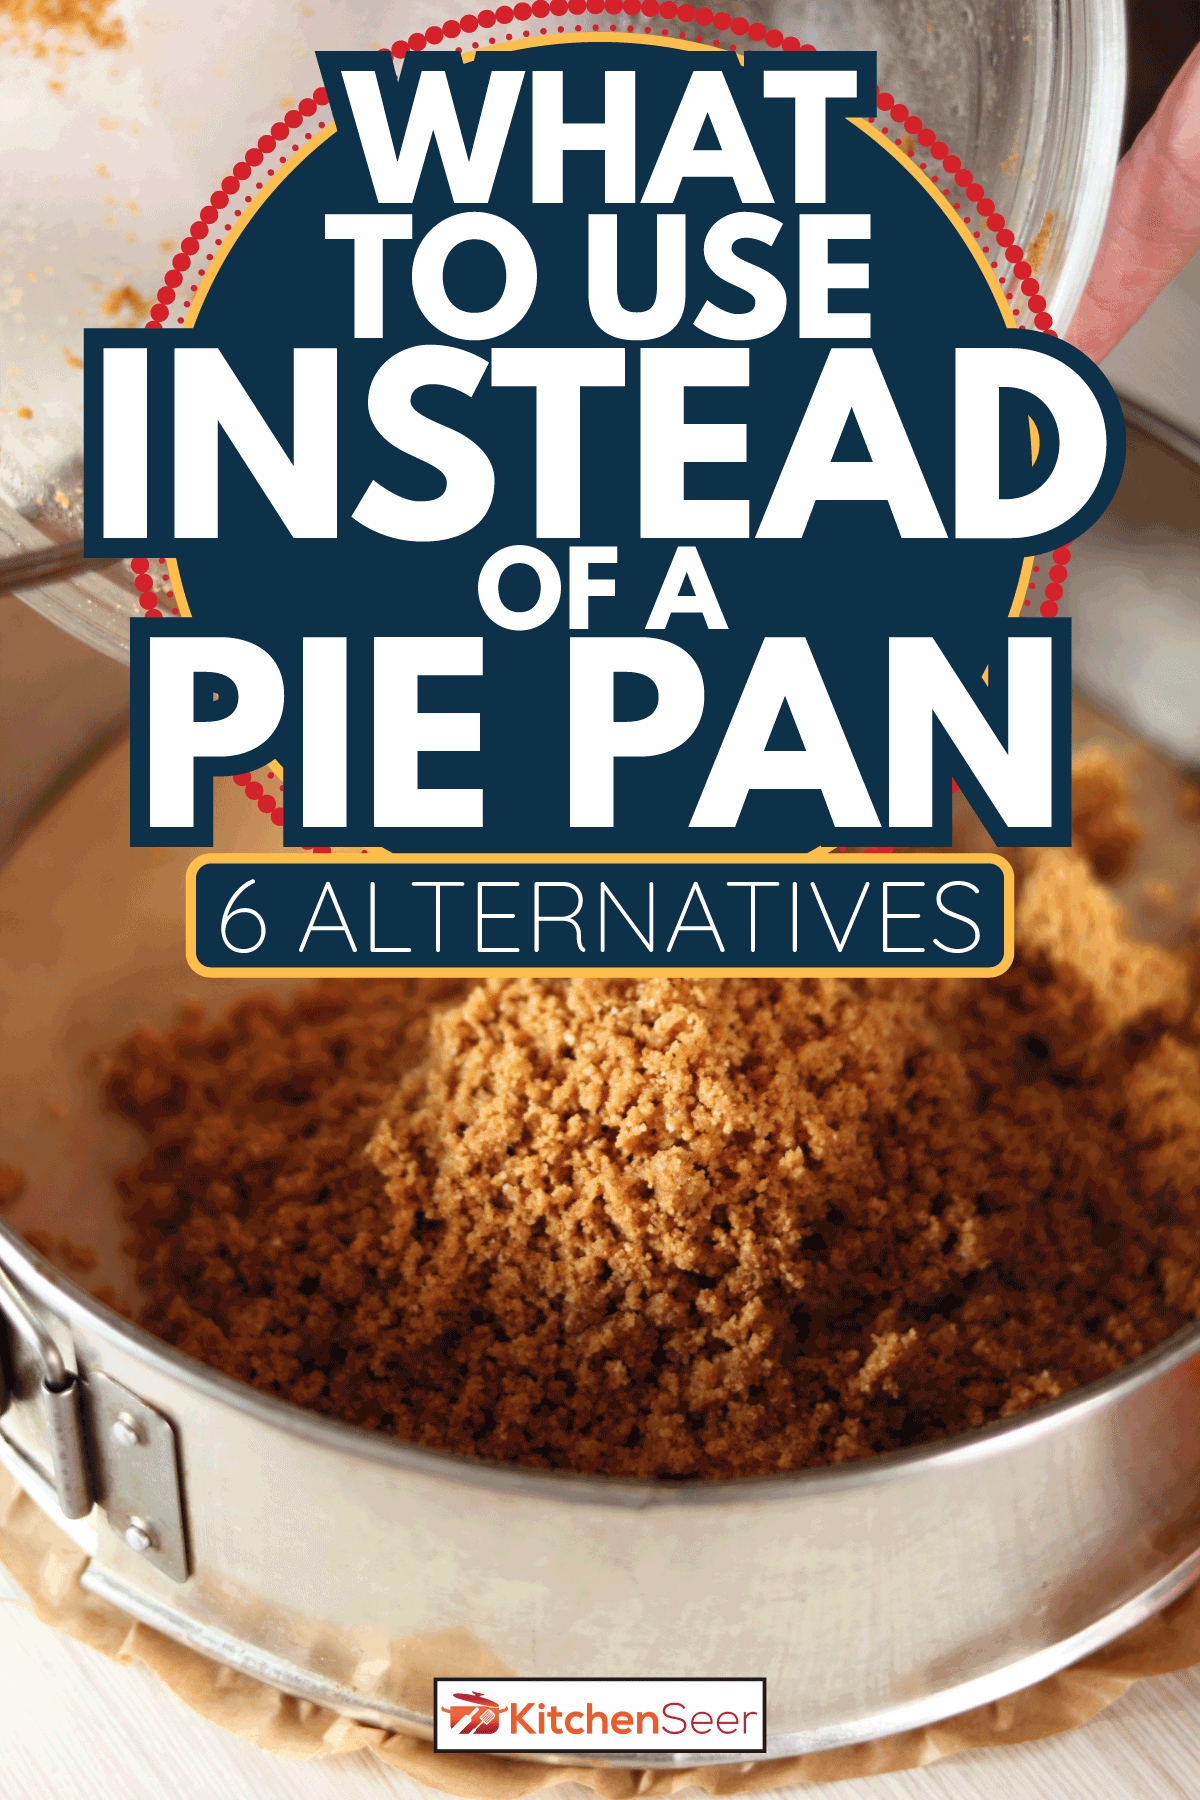 Transfer cookies mixture into baking pan. Making frozen strawberry cheesecake. What To Use Instead Of A Pie Pan [6 Alternatives]